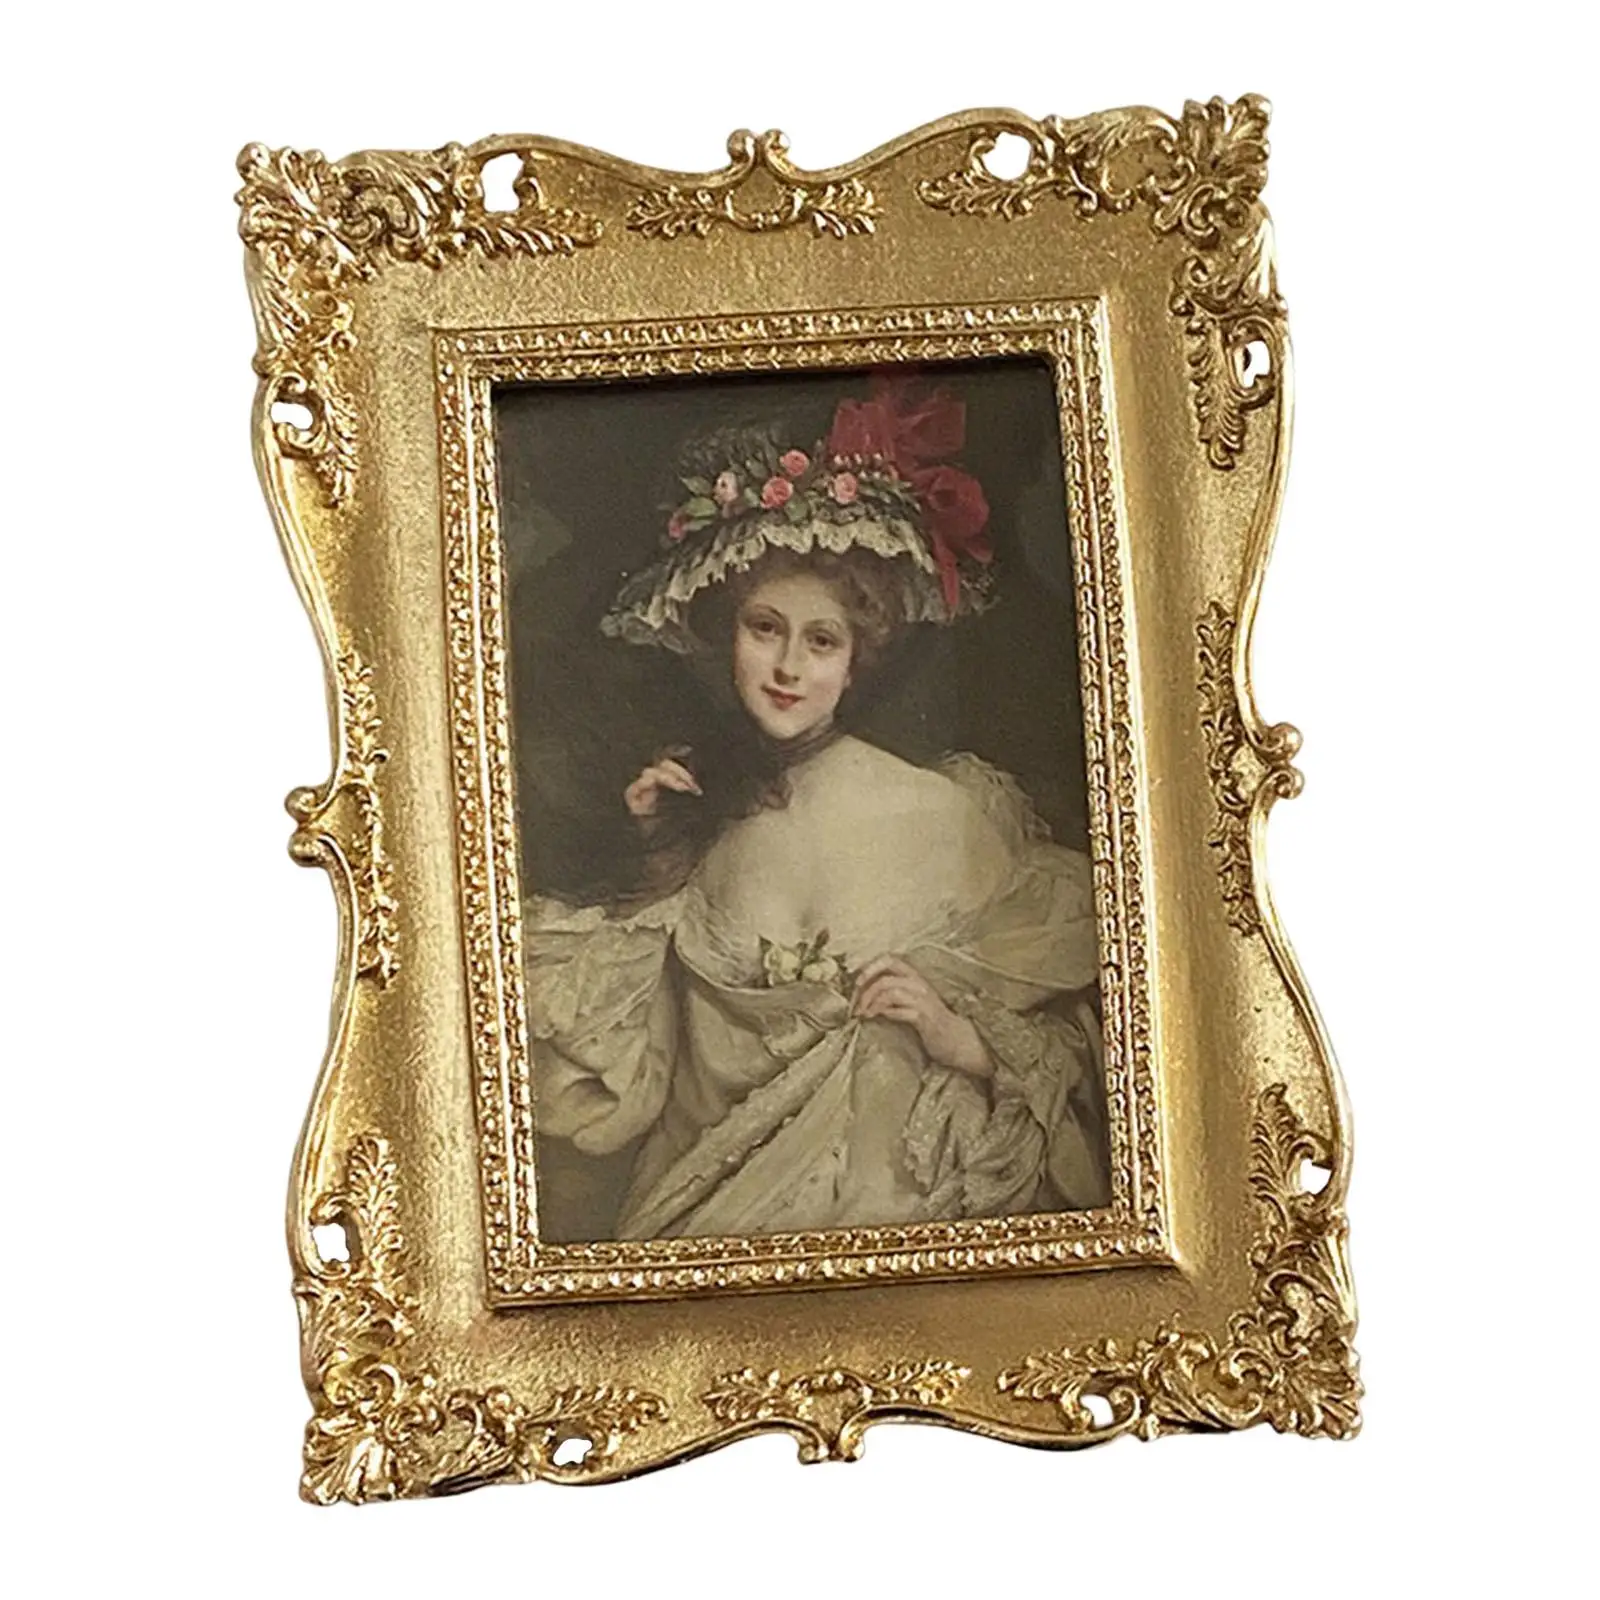 Vintage Style Photo Frame Picture Holder Tabletop Wall Hanging for Holiday